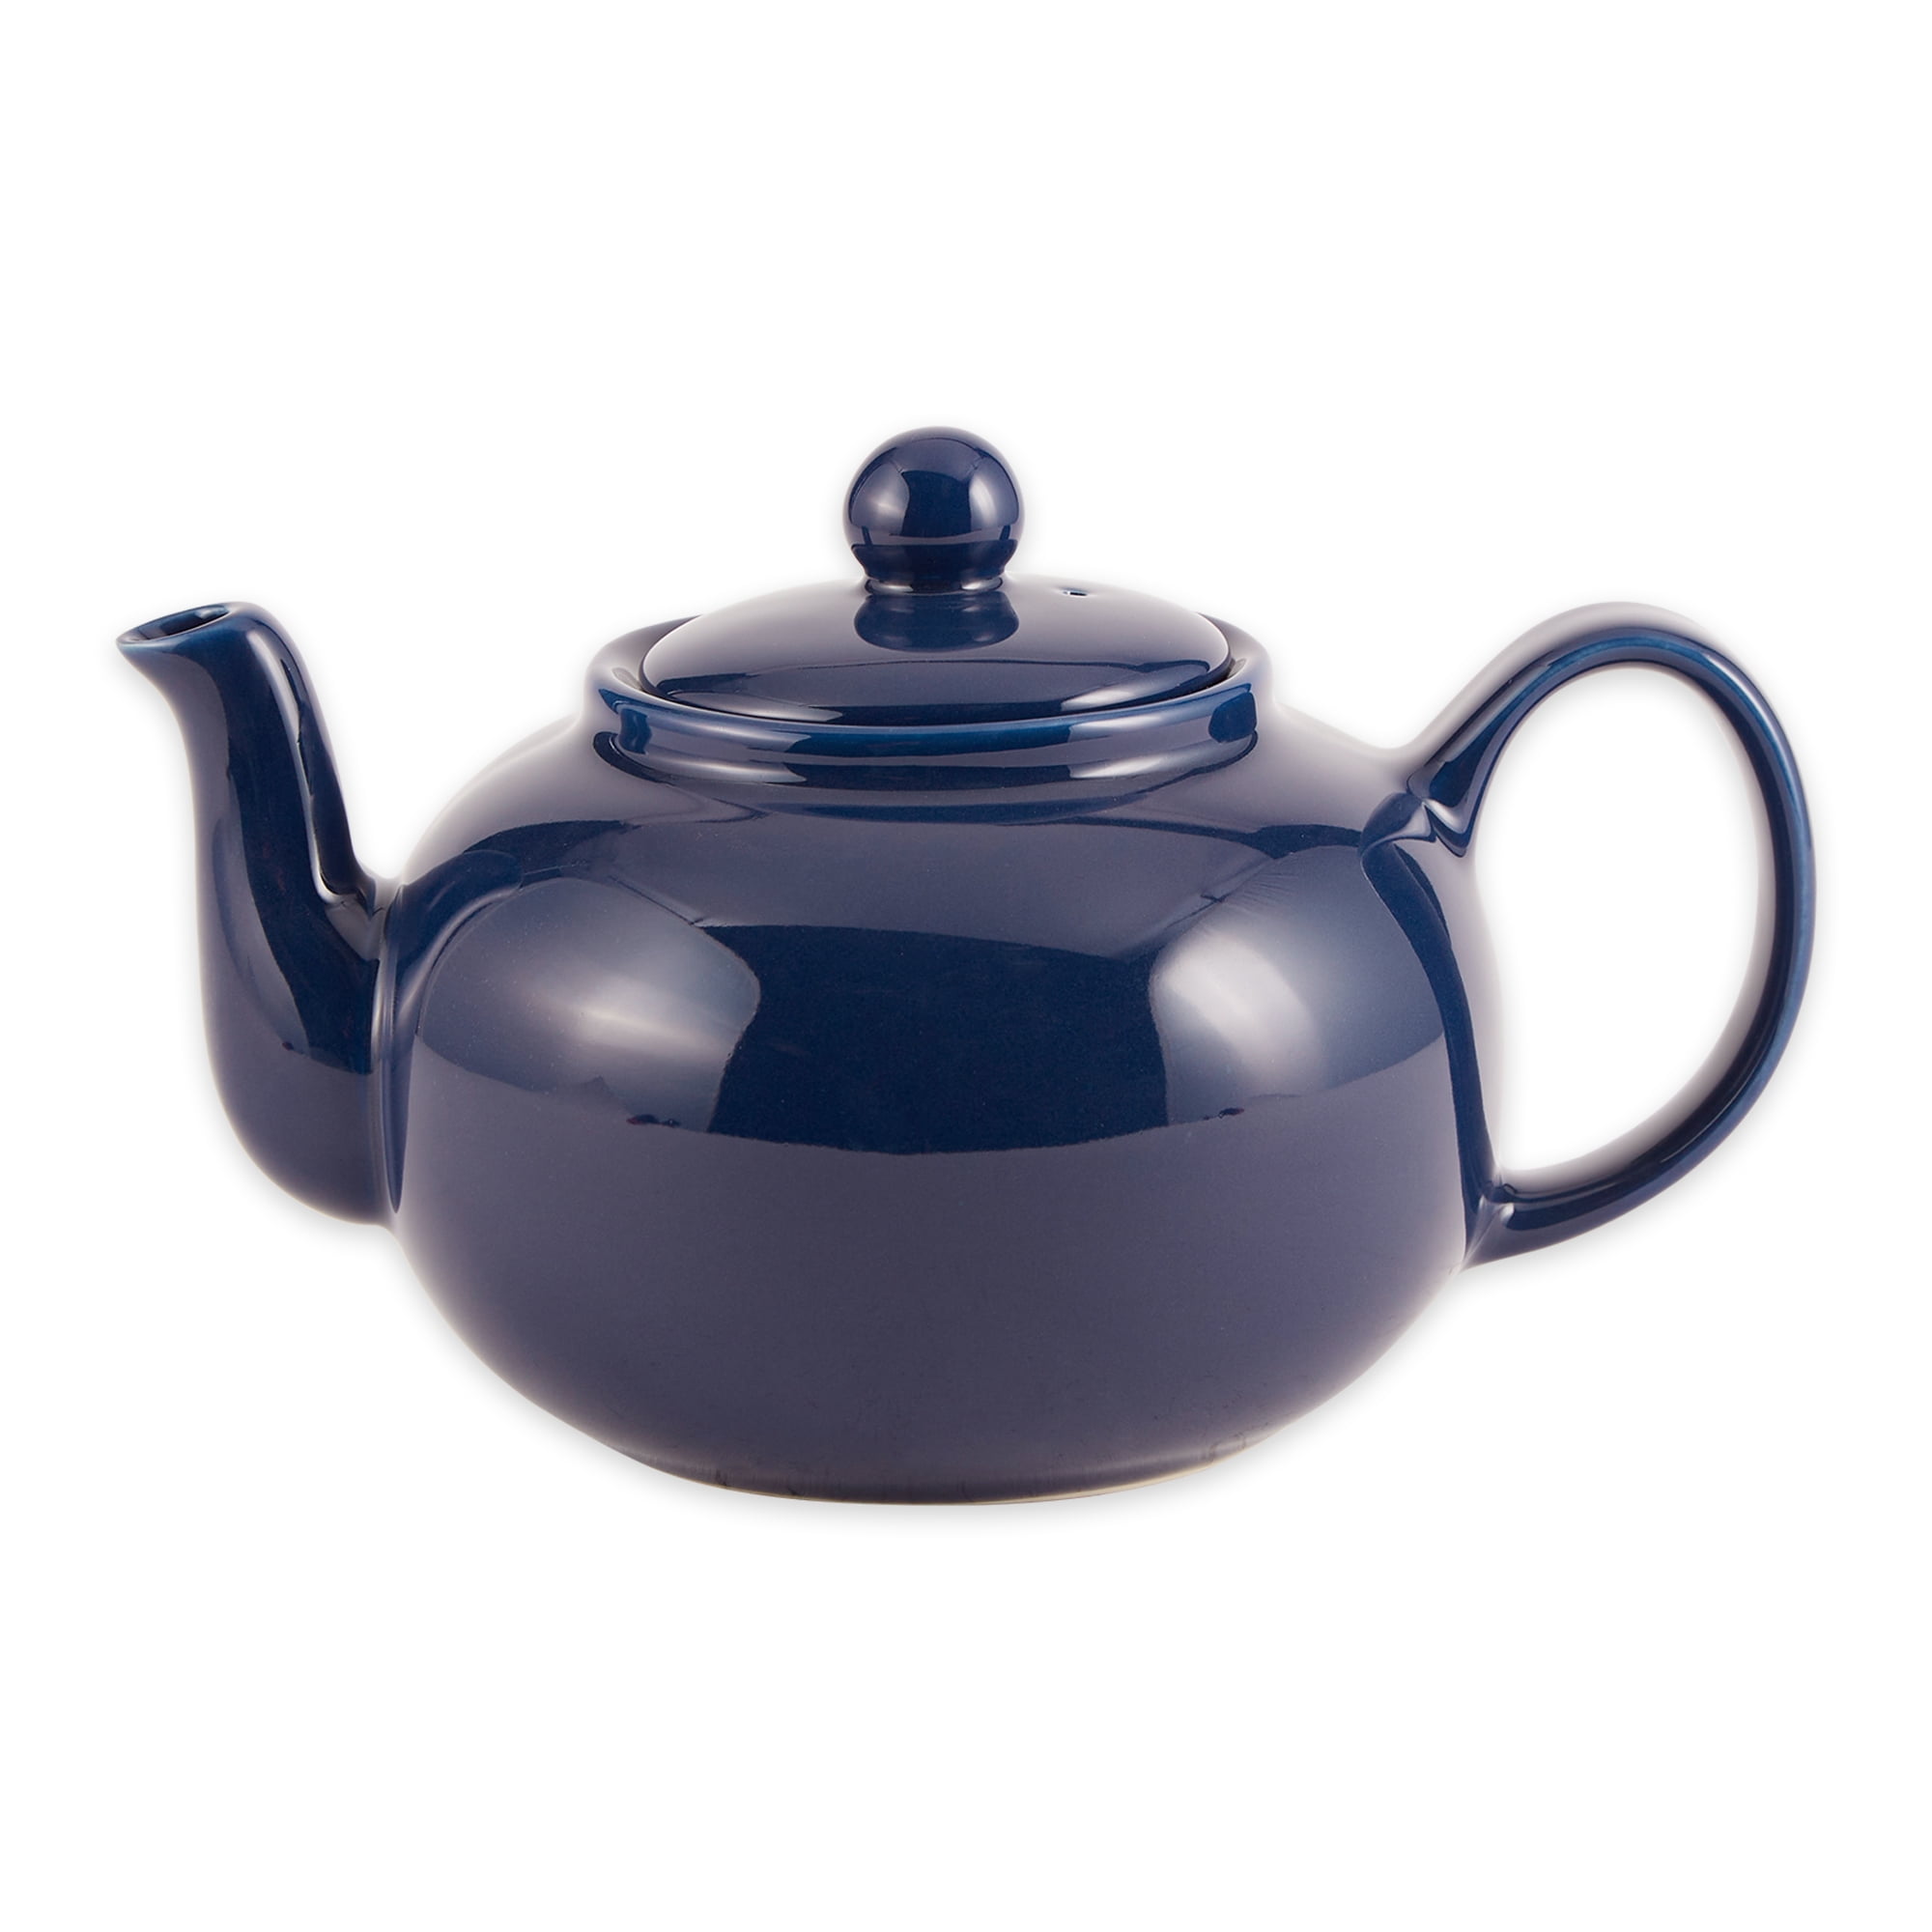 Zerodis Stainless Steel Teapot,1.2L/1.5L Stainless Steel Stove-top